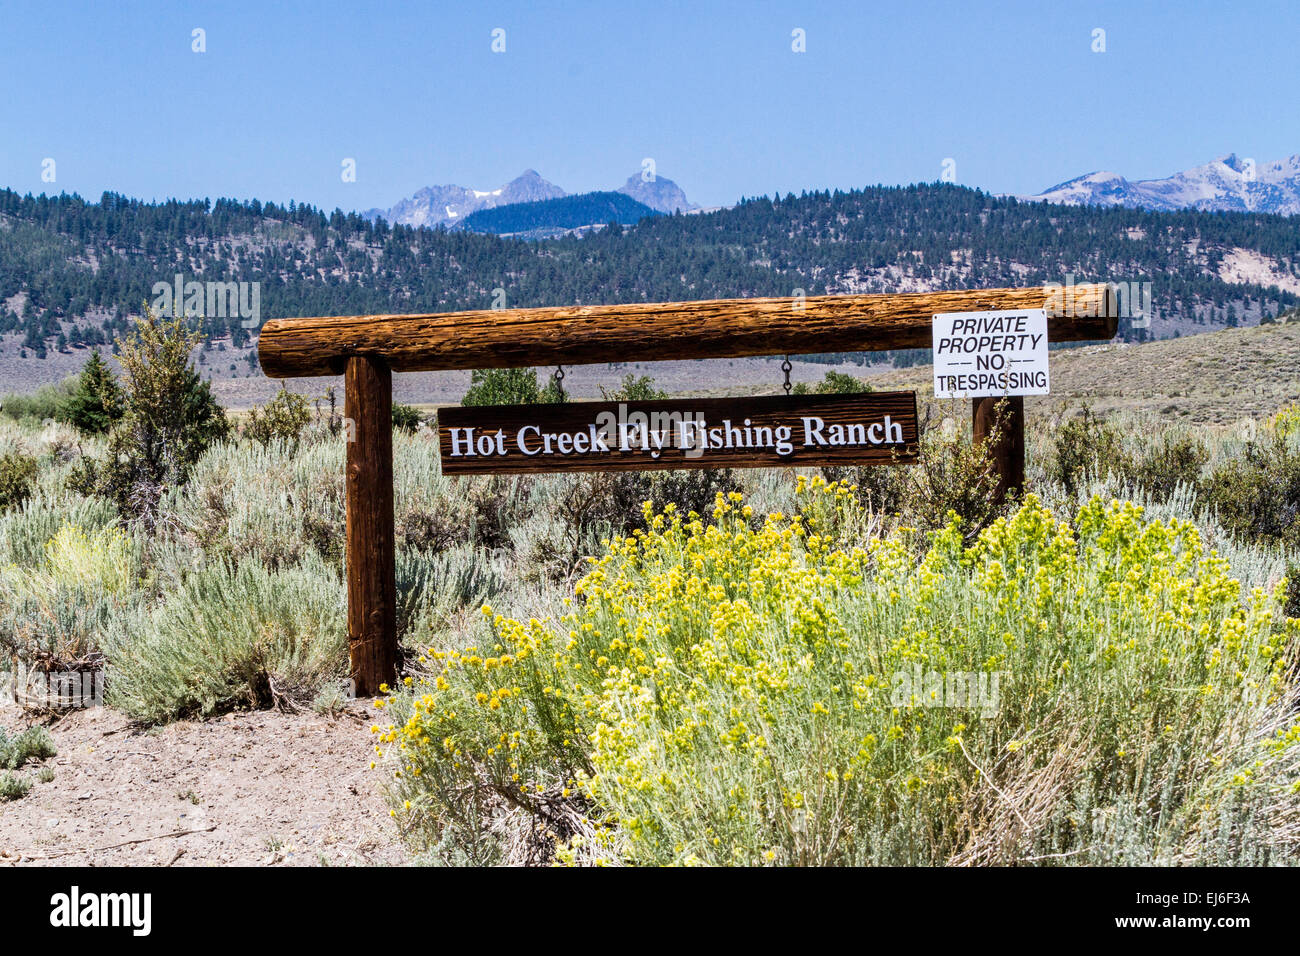 A sign for the Hot Creek Fly Fishing Ranch with Mammoth Lakes visible in the background Stock Photo